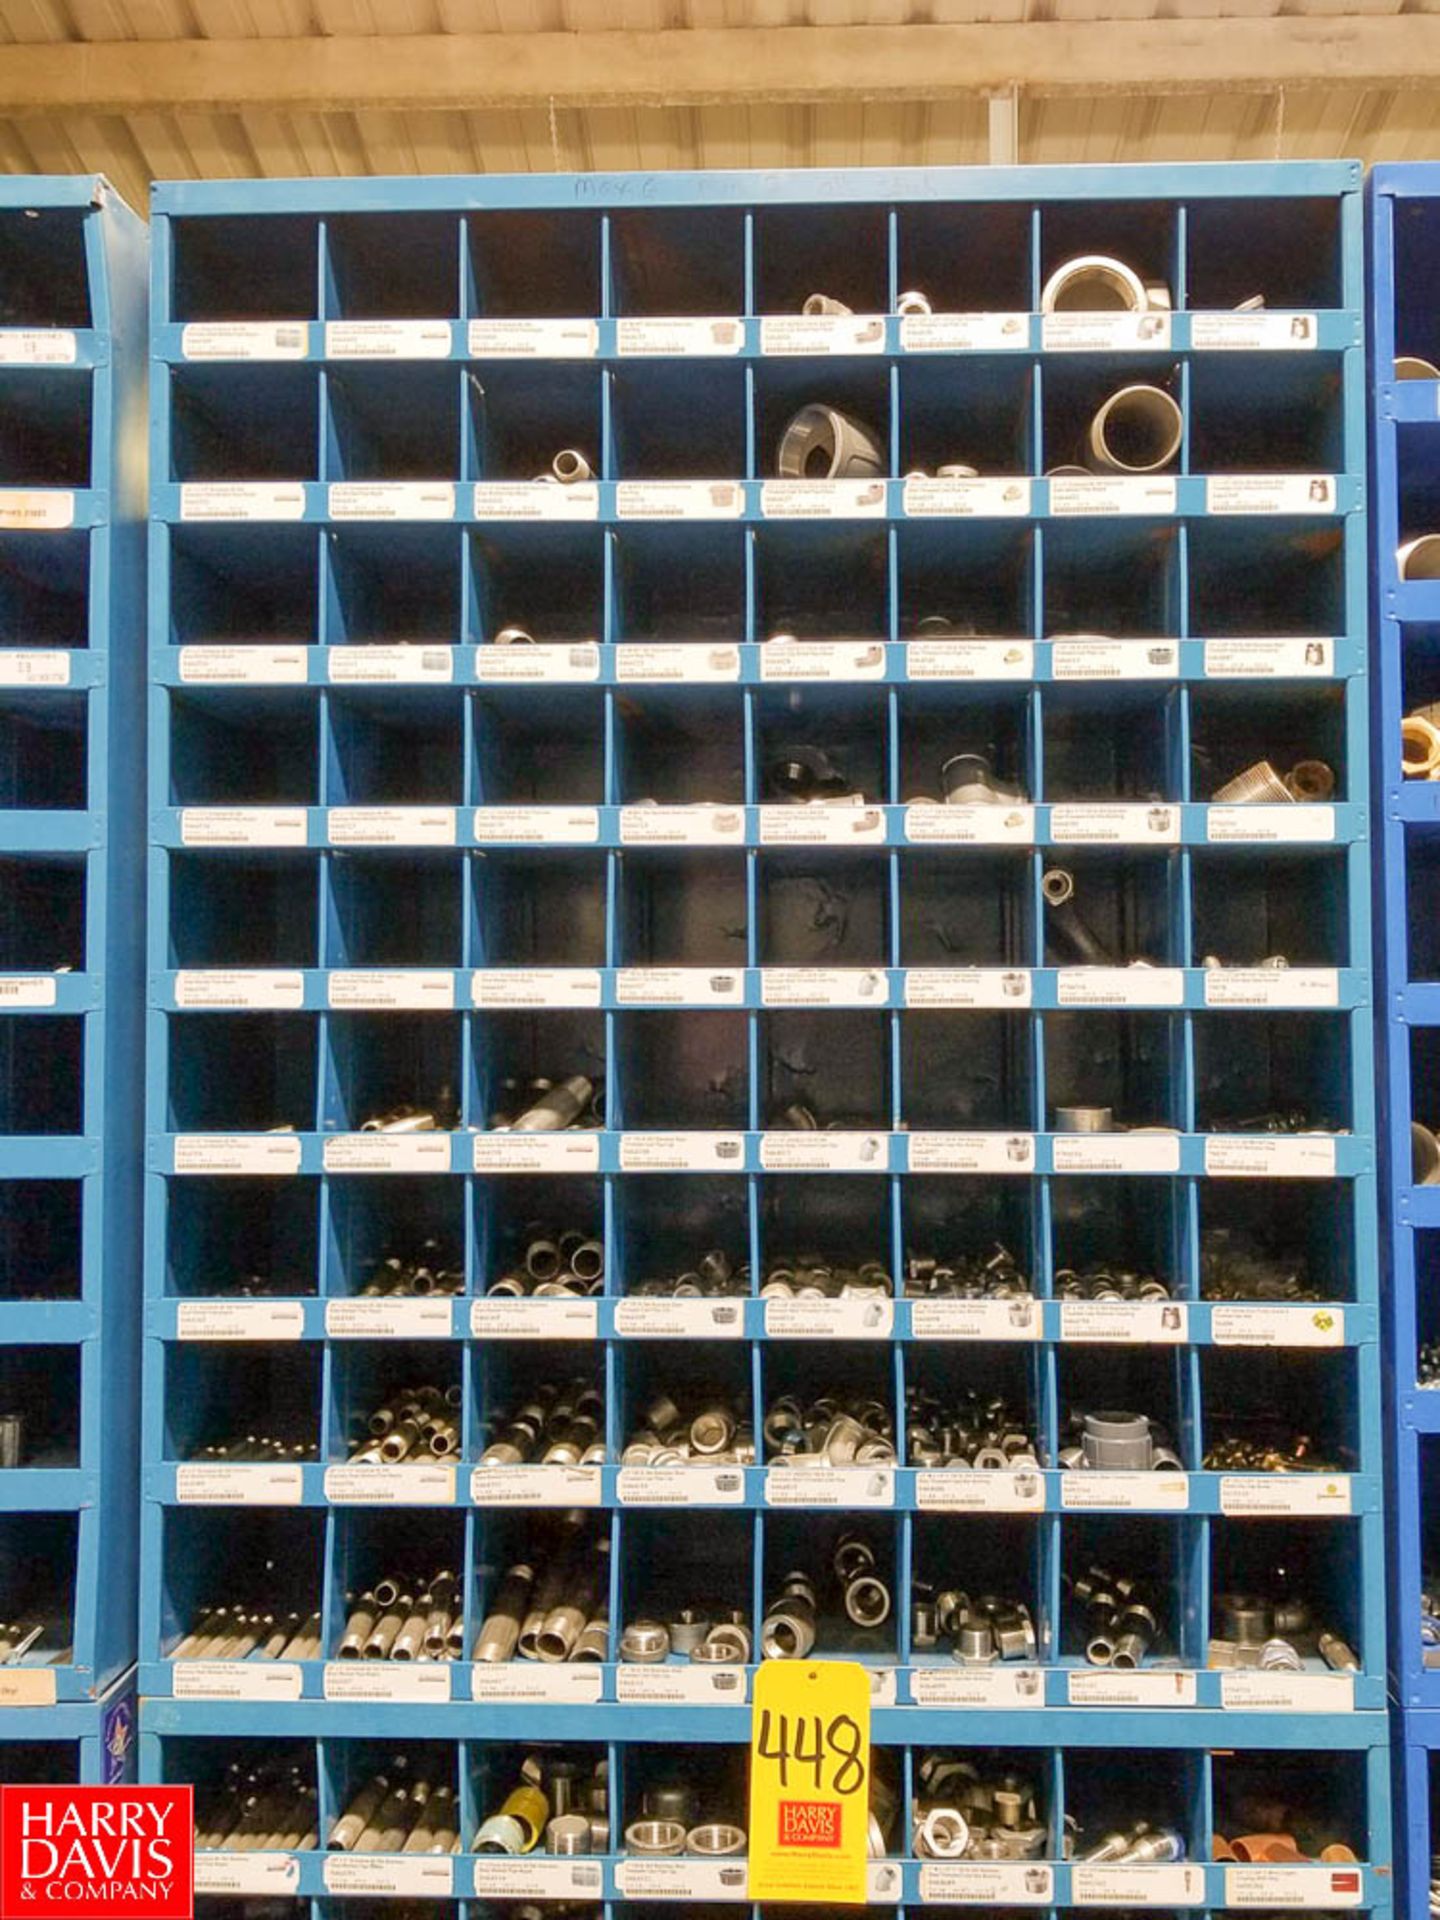 Fastenal 72-Compartment Bolt Bins with Contents of S/S Pipe Fittings - Rigging Fee: $200 - Image 2 of 3